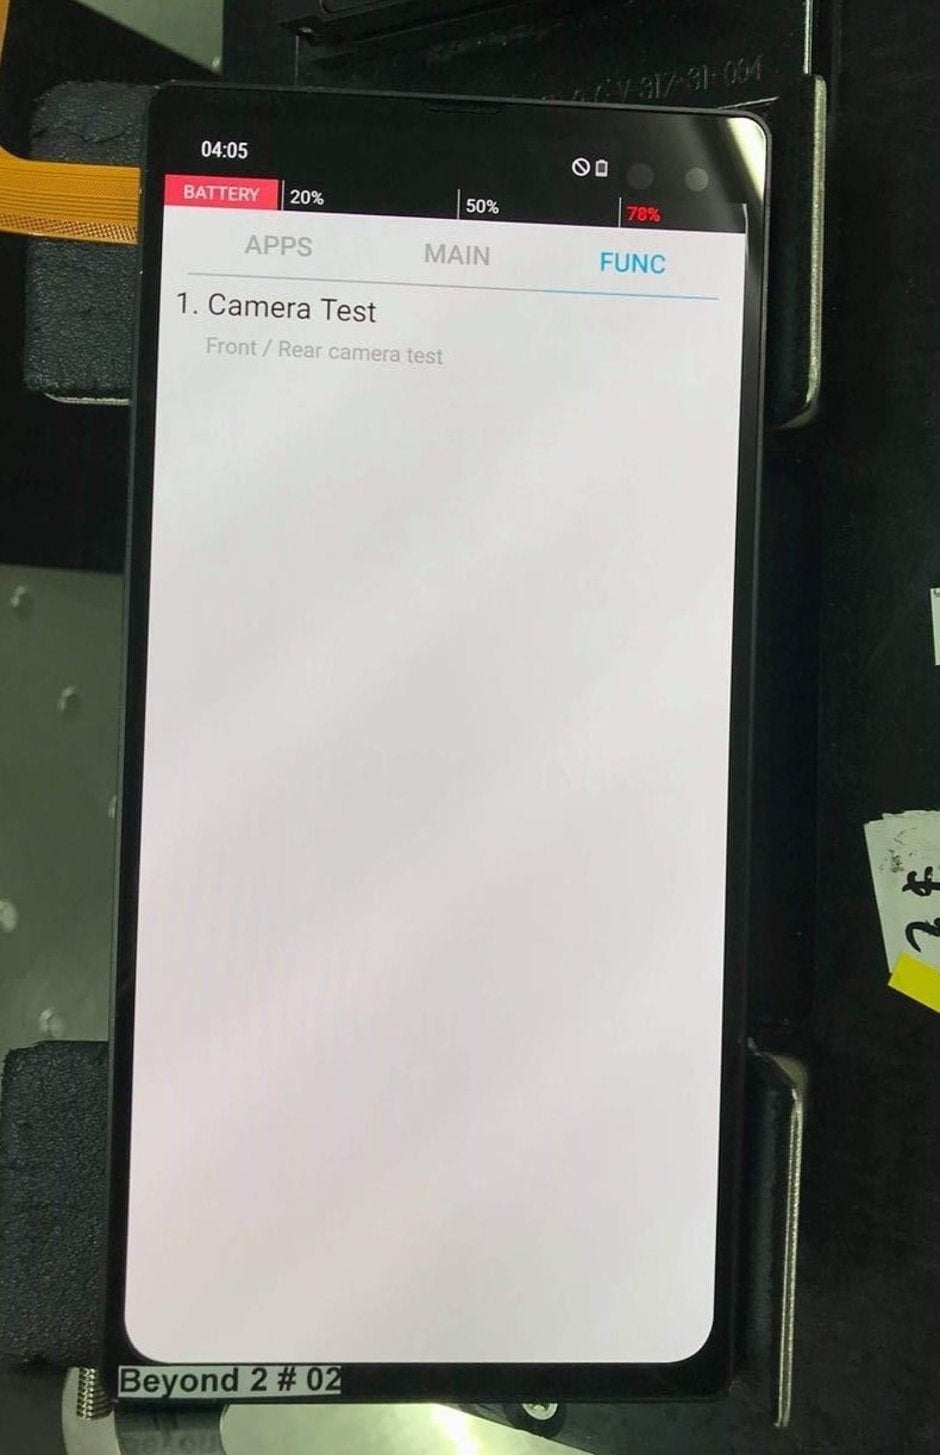 Alleged Samsung Galaxy S10+ prototype spotted in testing at factory